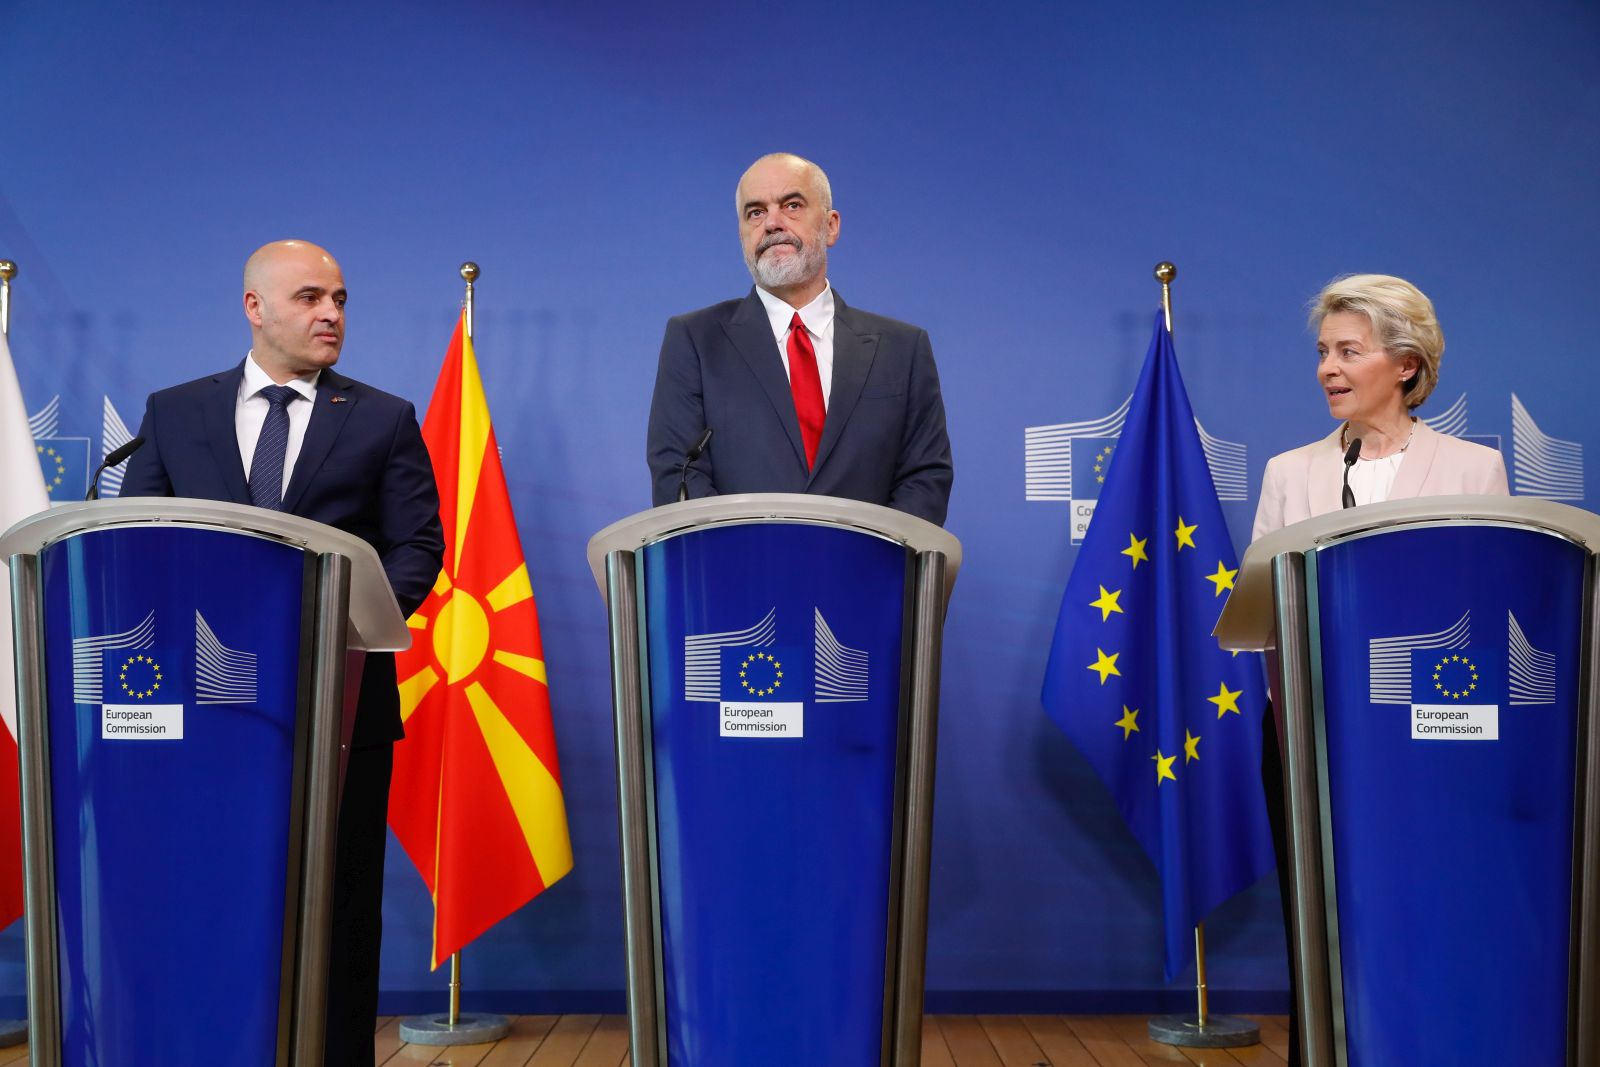 epa10079146 (L-R) Prime Minister of North Macedonia Dimitar Kovacevski, Prime Minister of Albania Edi Rama and President of the European Commission Ursula von der Leyen give a joint press conference at the end of a meeting on the first negotiations for accession to the European Union at the European Commission in Brussels, Belgium, 19 July 2022.  EPA/STEPHANIE LECOCQ